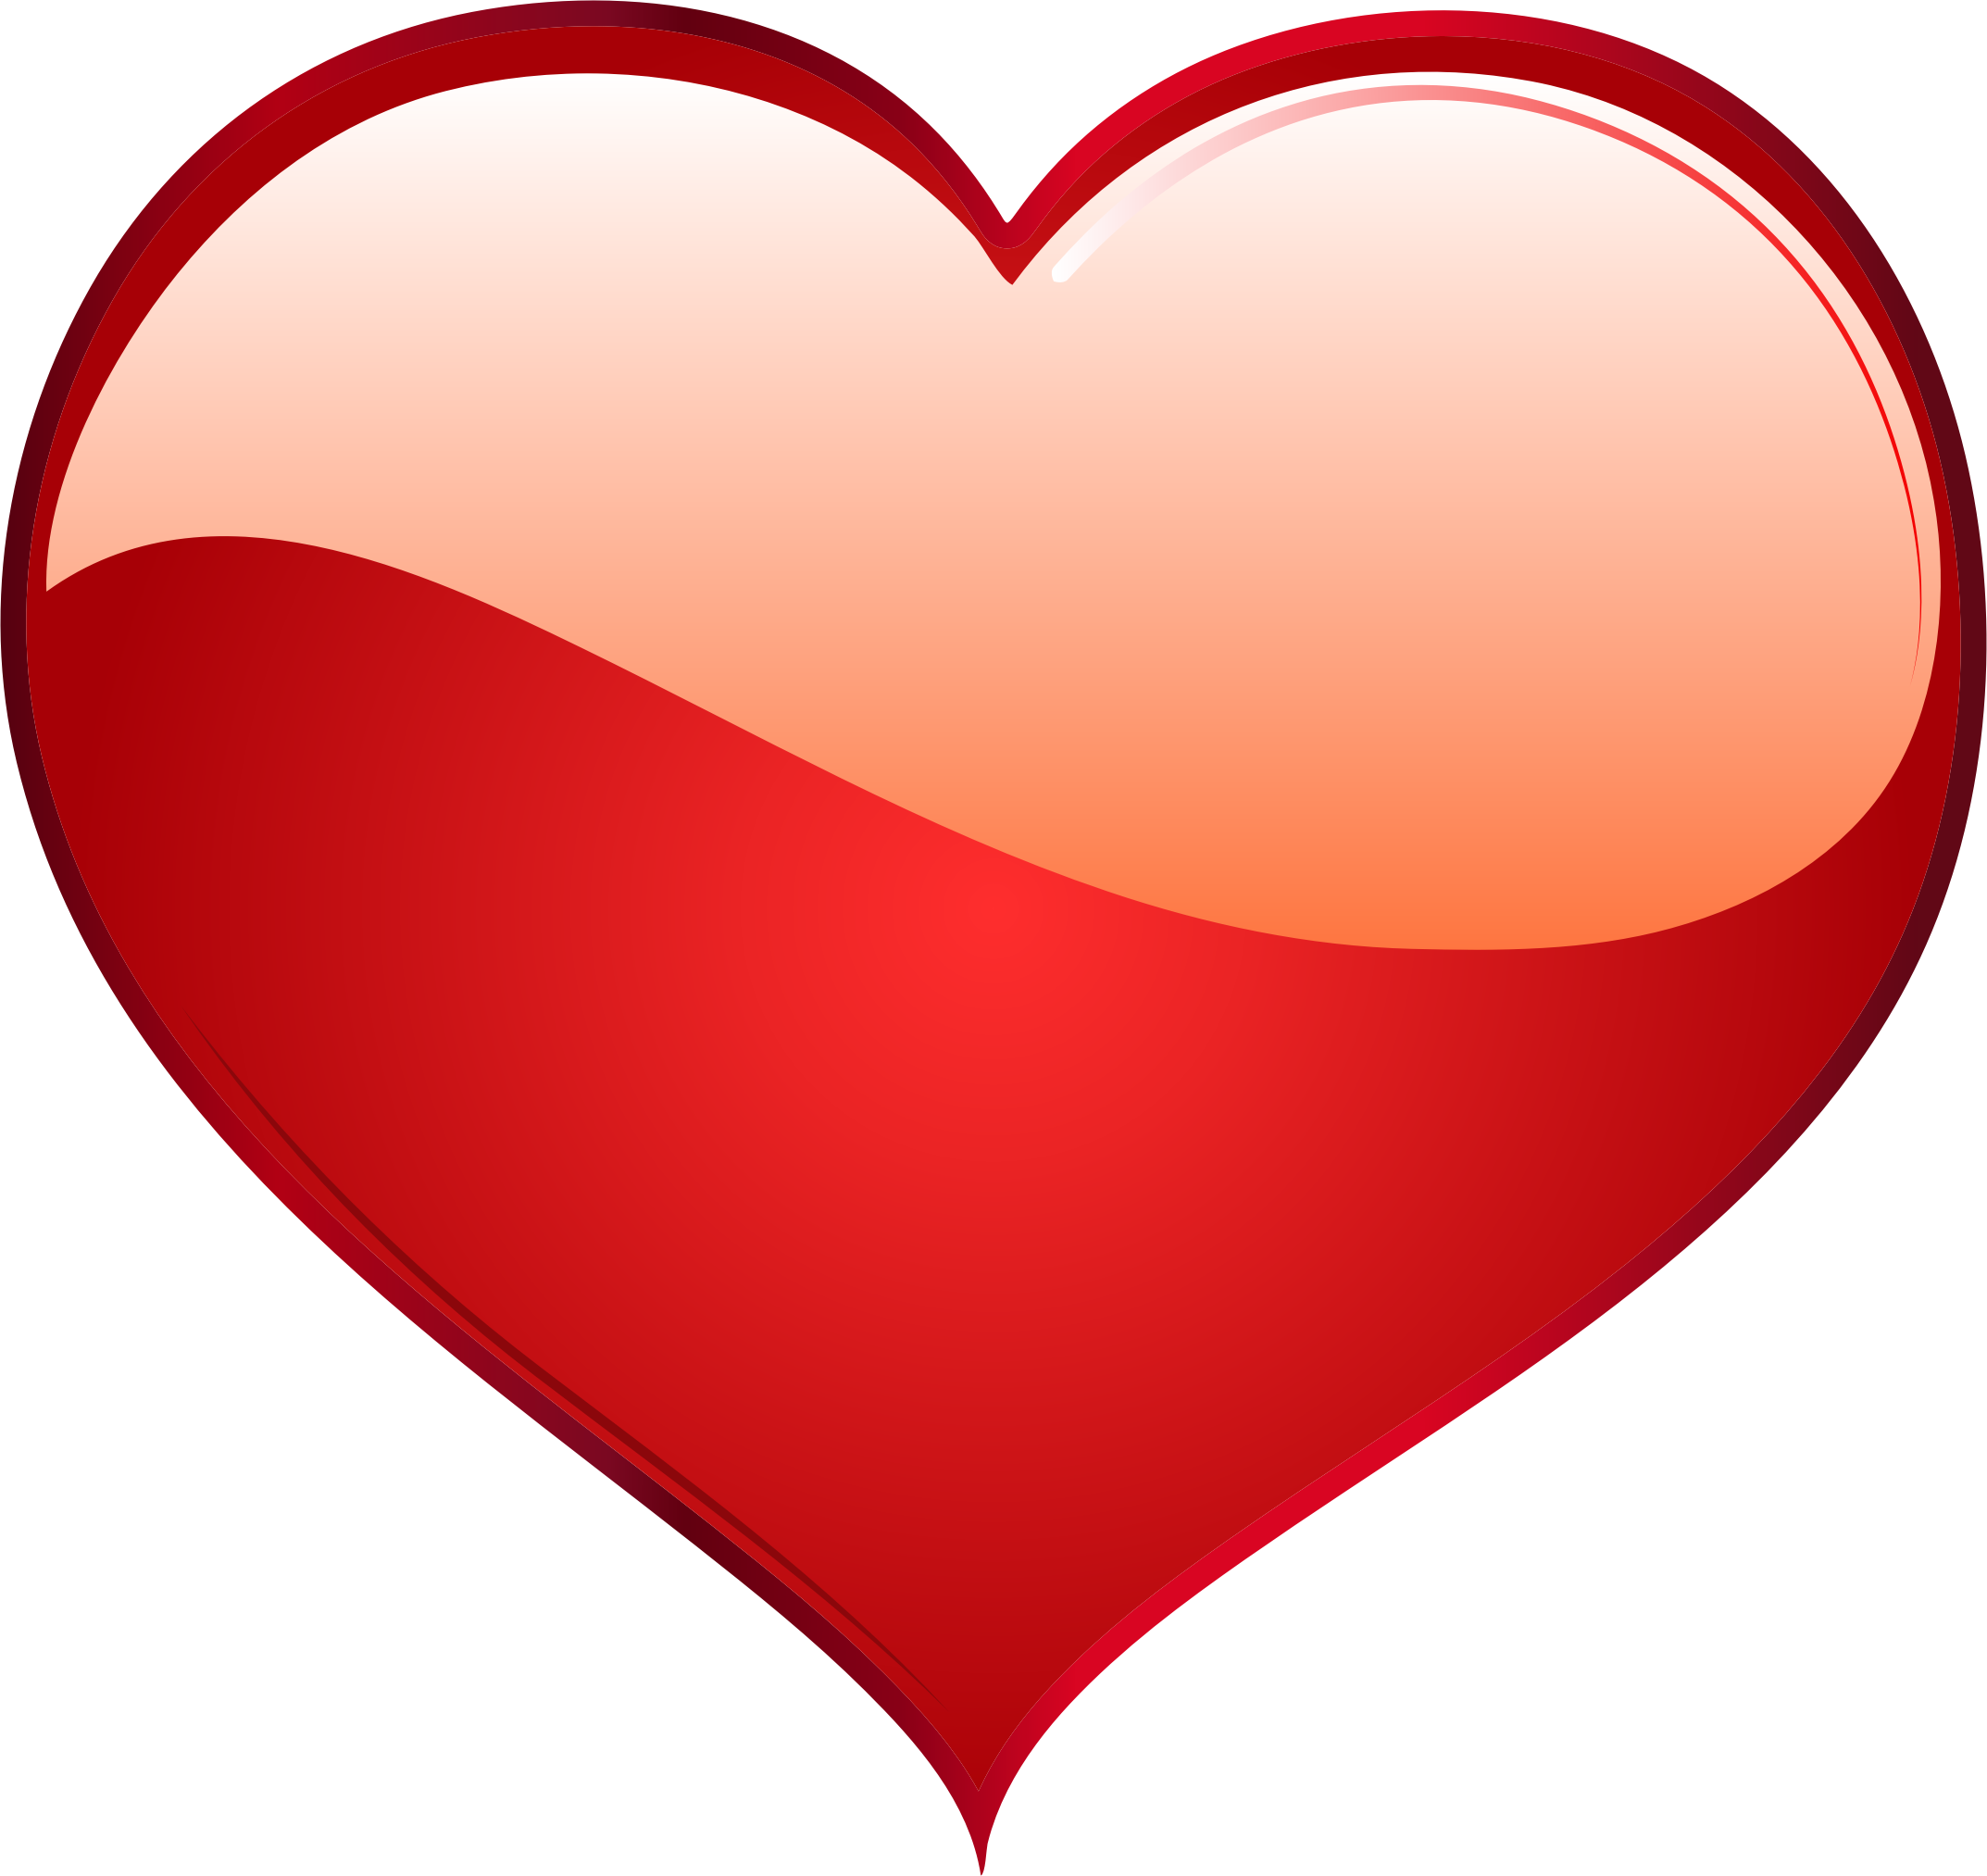 Heart Red Illustration Red Heart Transparent PNG png